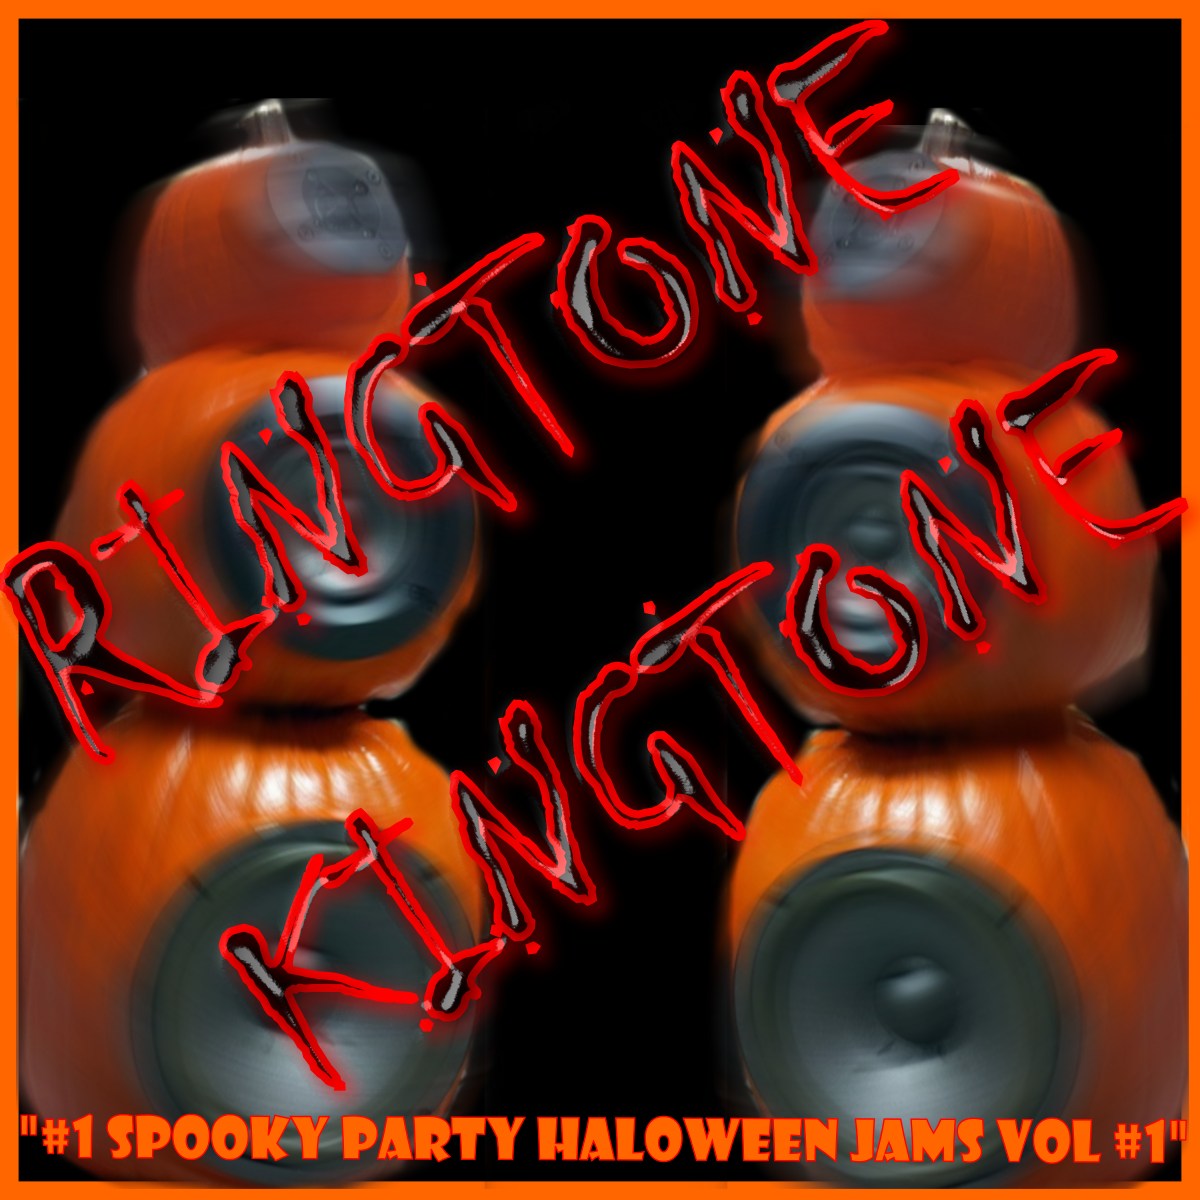 Cover art for #1 SPOOKY PARTY HALLOWEEN JAMS VOL #1